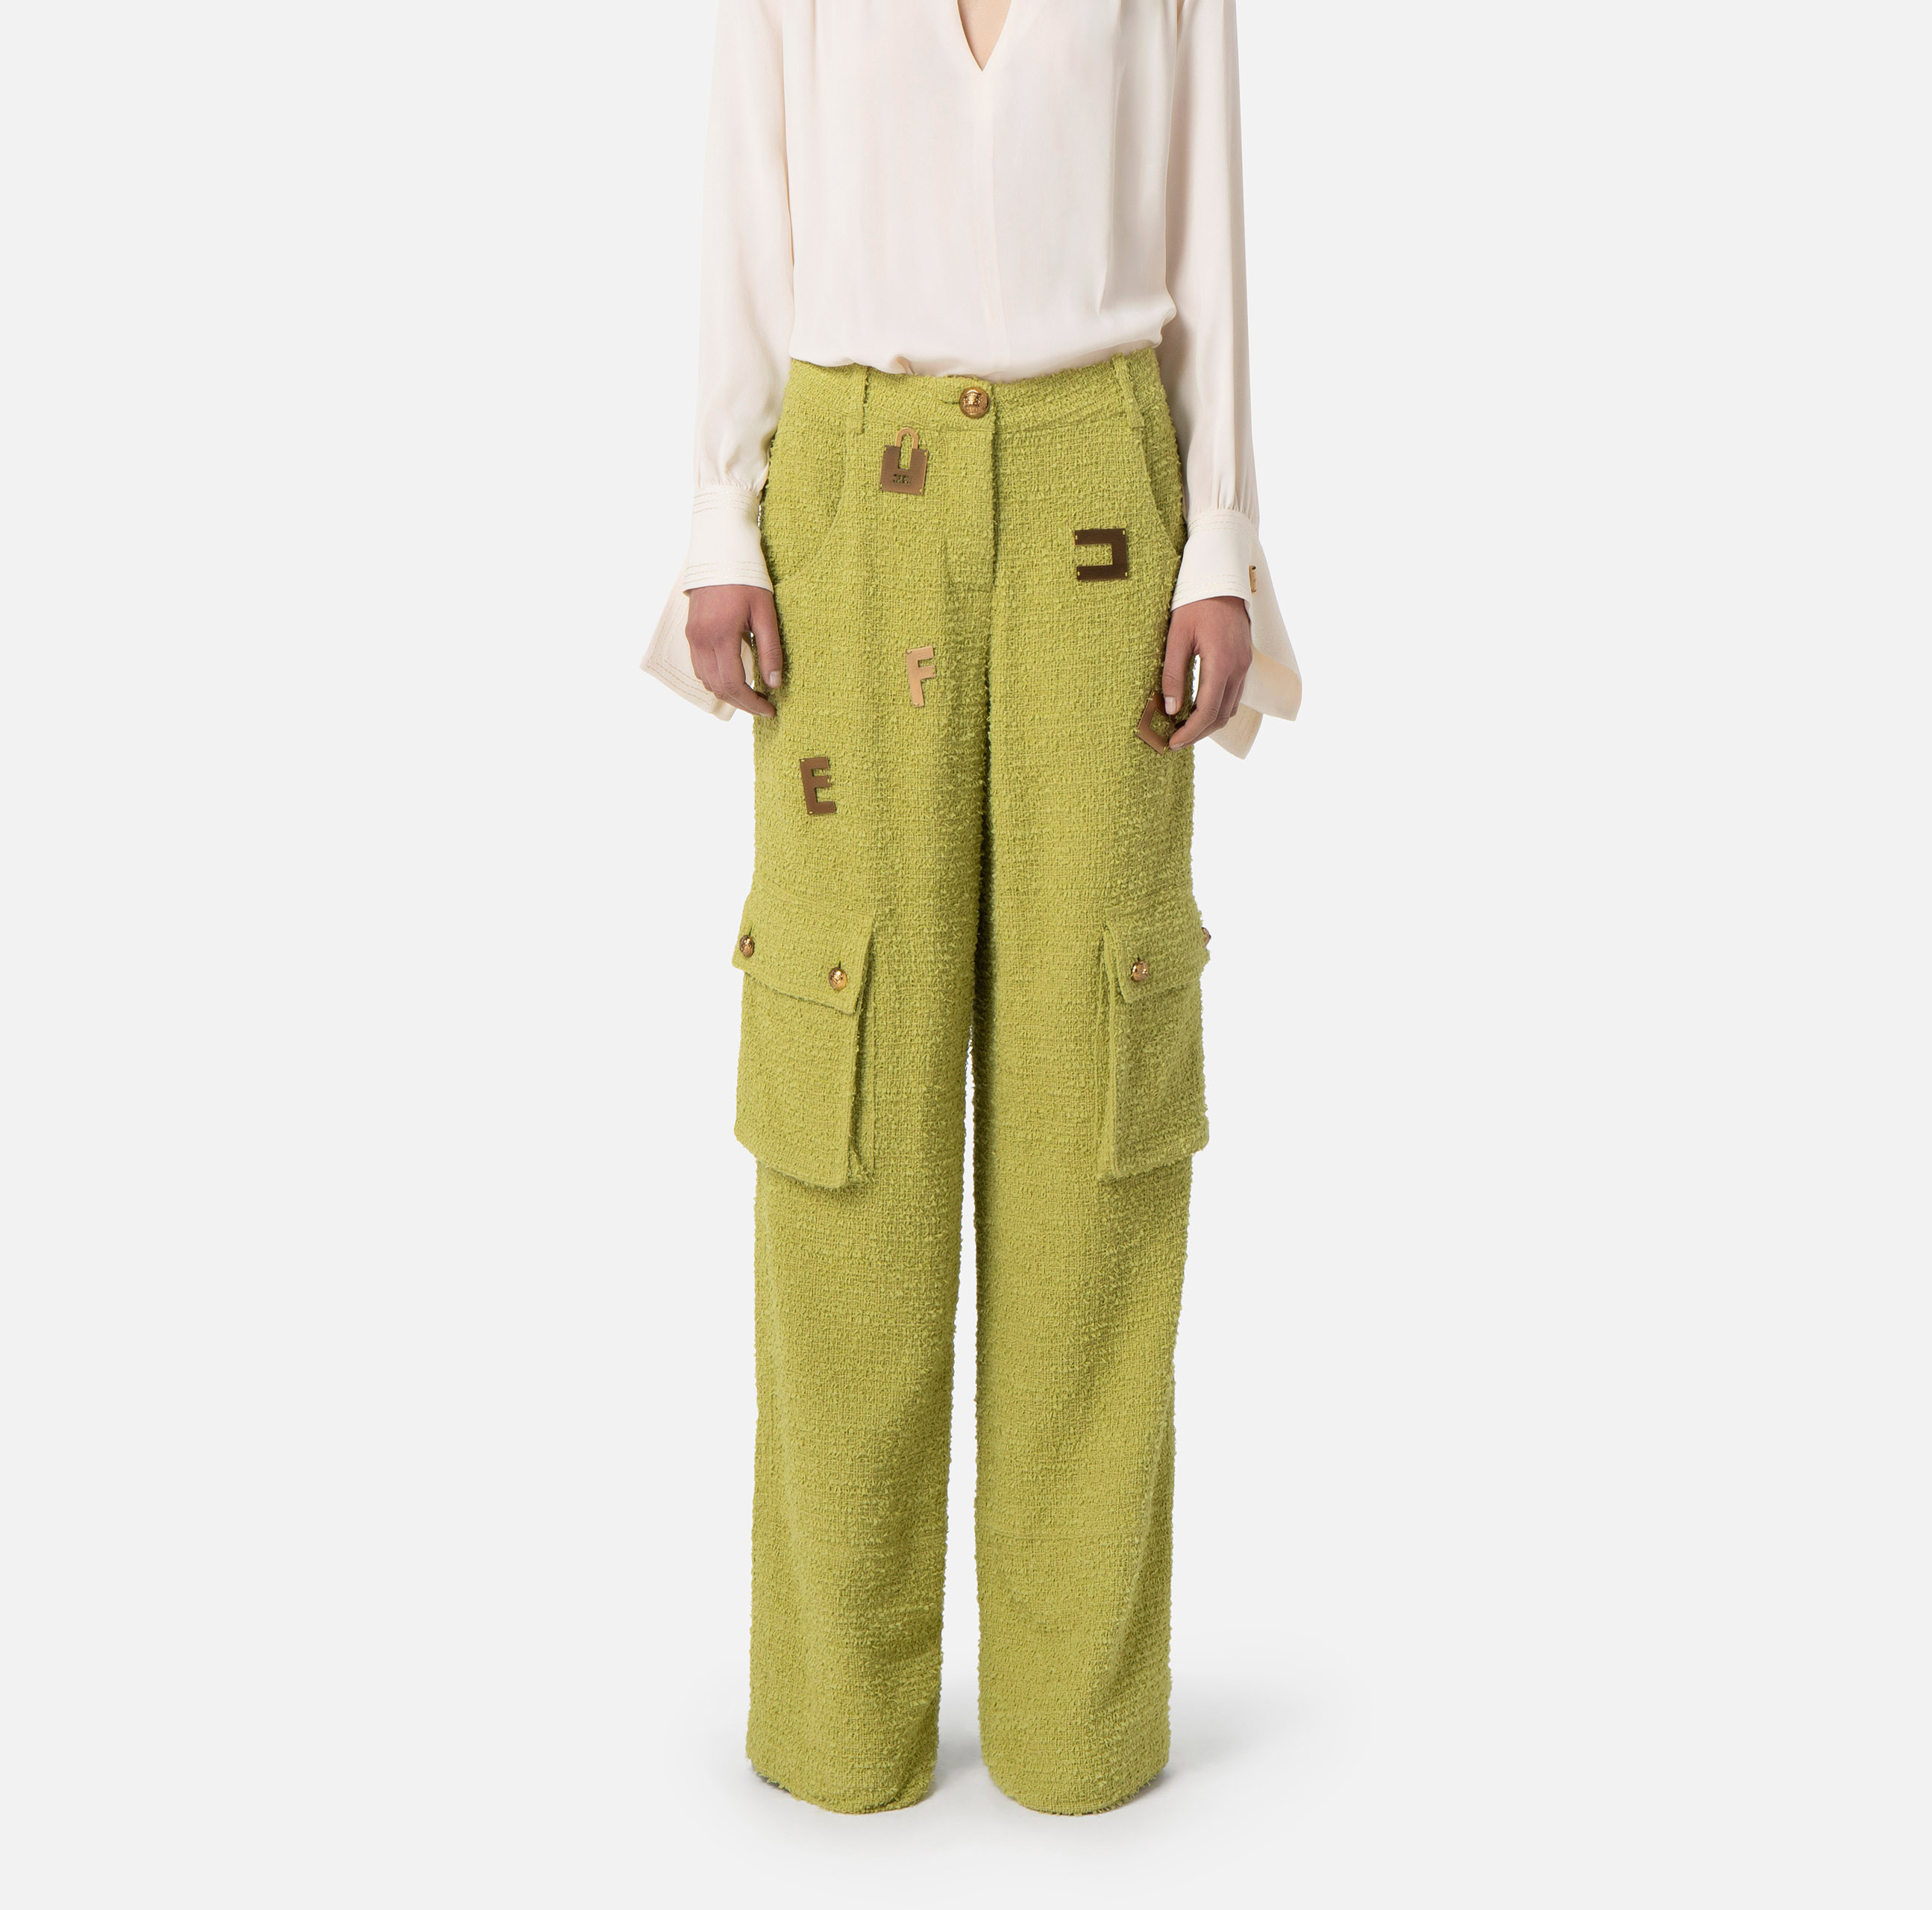 Cargo trousers in tweed fabric with lettering - Elisabetta Franchi